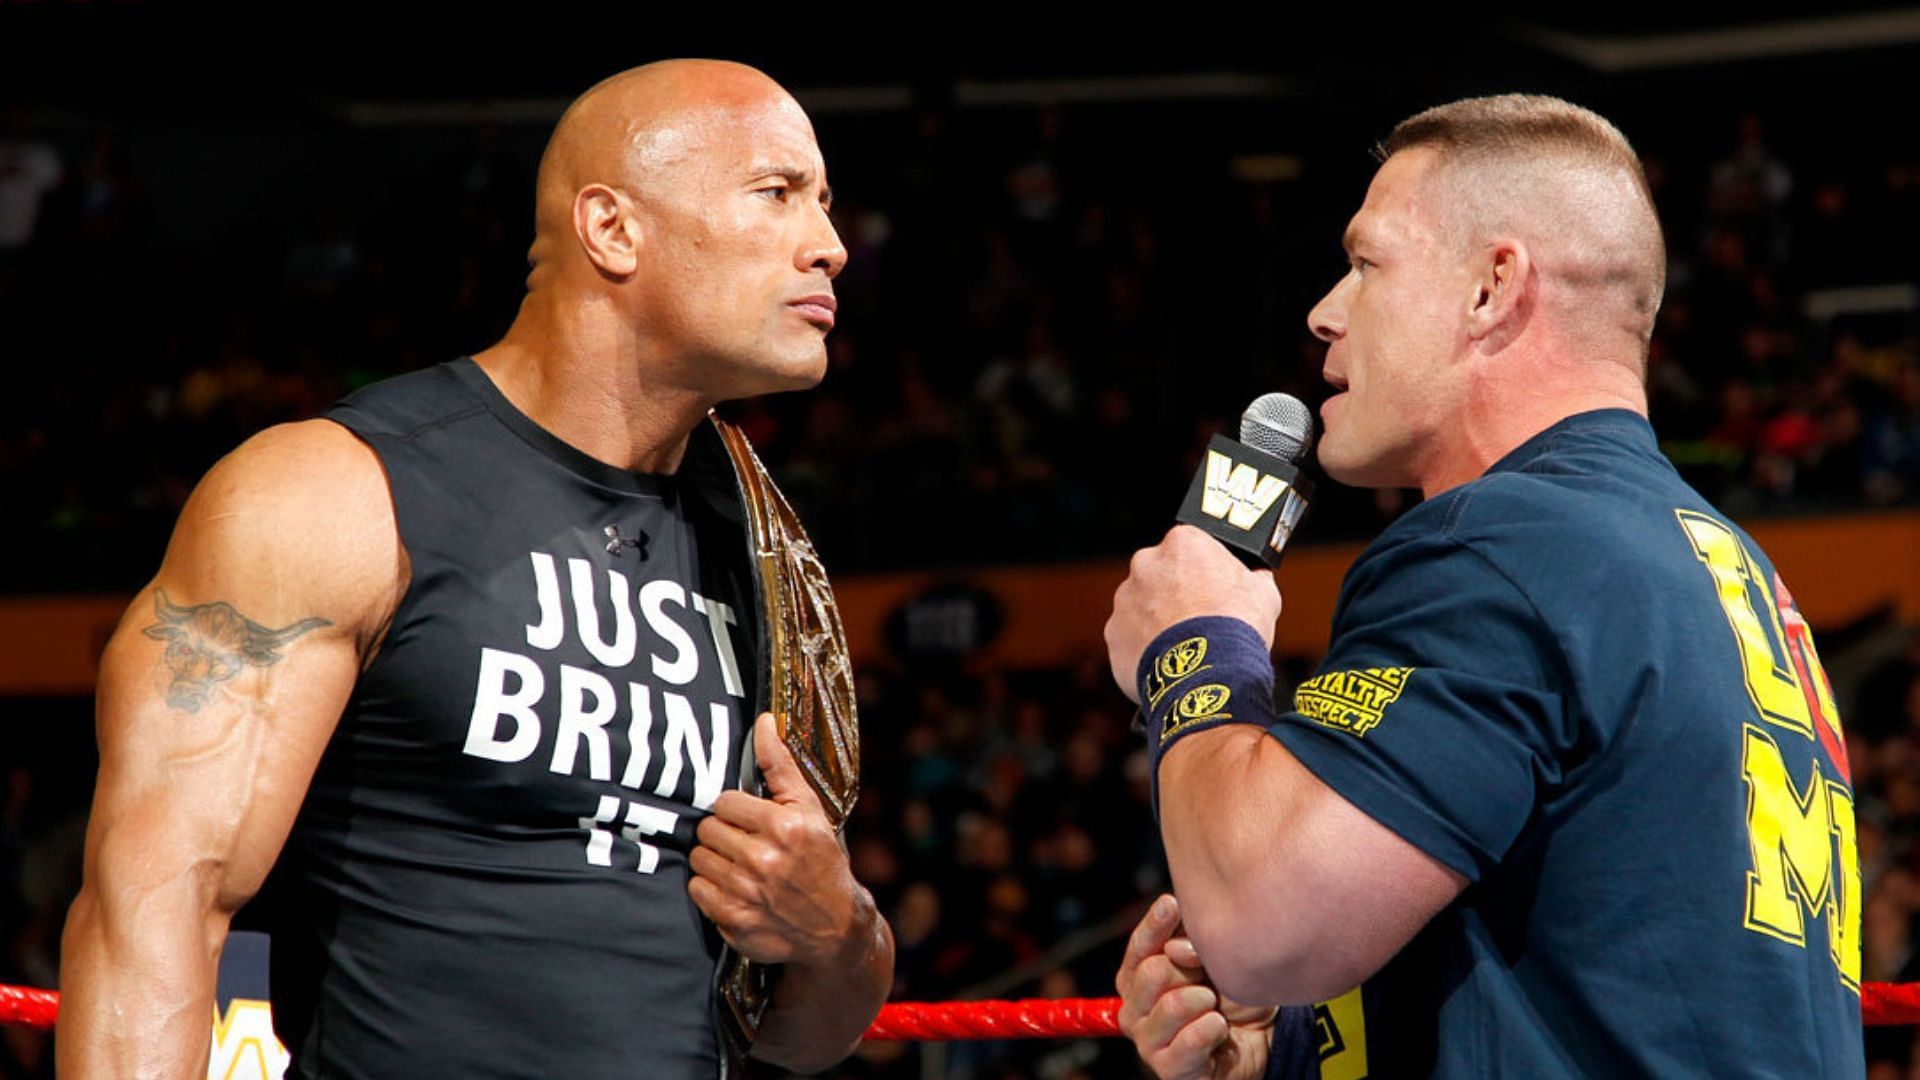 How did Dwayne Johnson help John Cena land a role in a Hollywood movie?